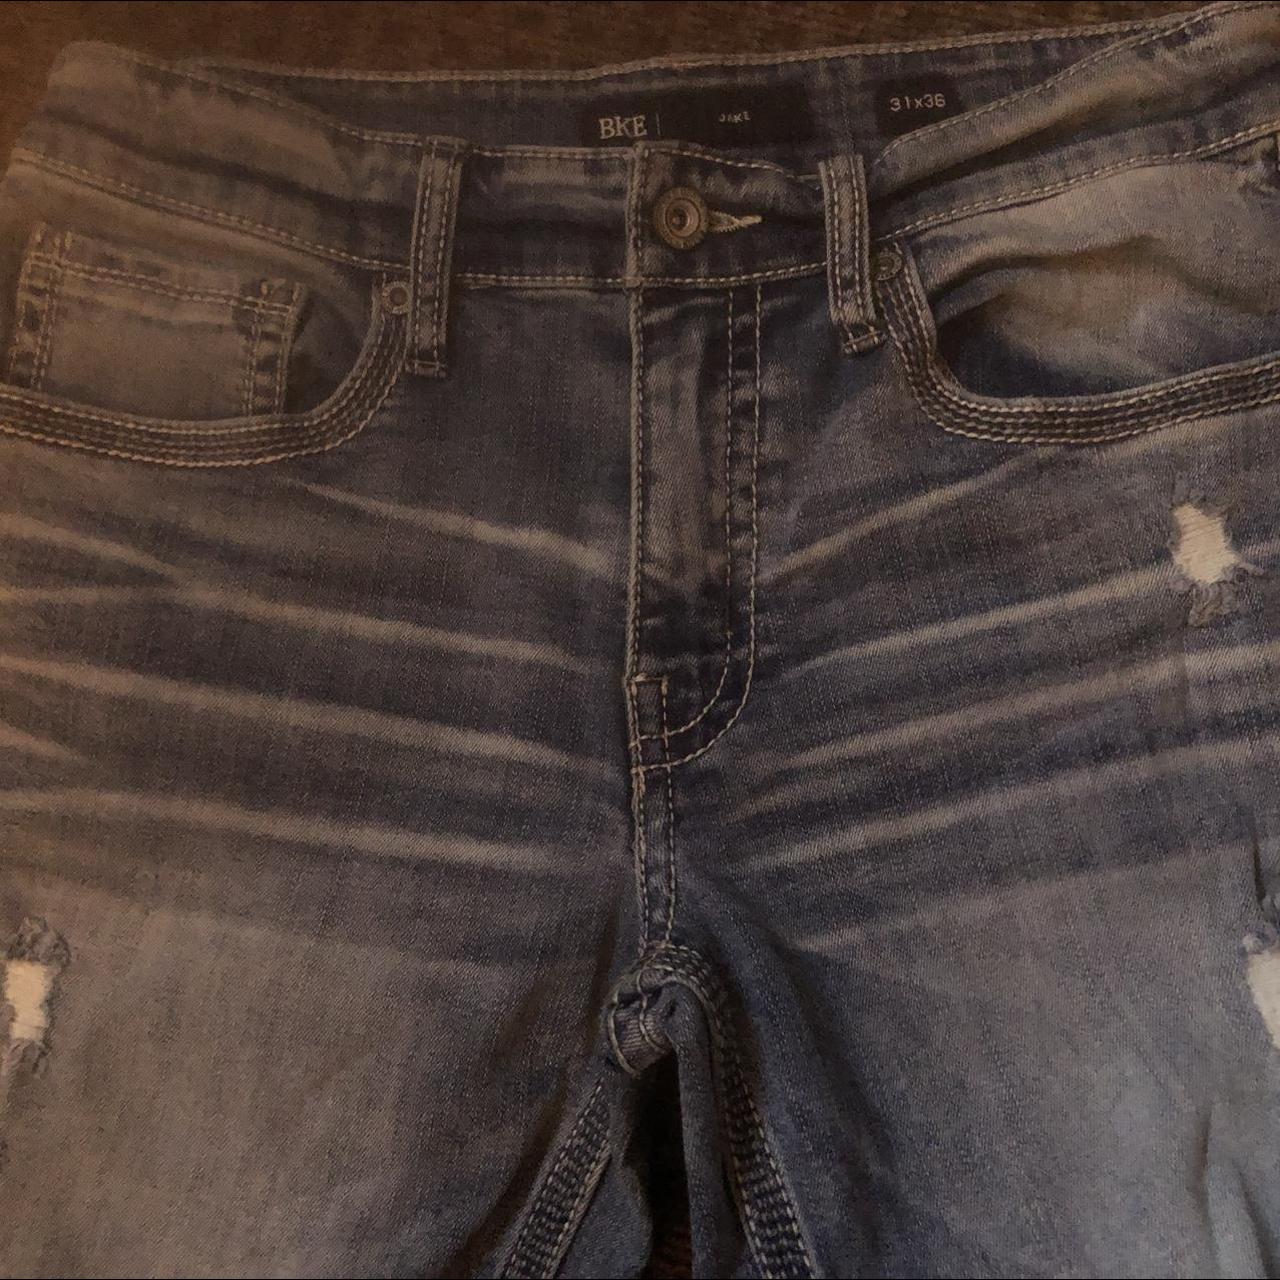 Mens BKE Buckle Jake Jeans size 31x36 distressed and... - Depop